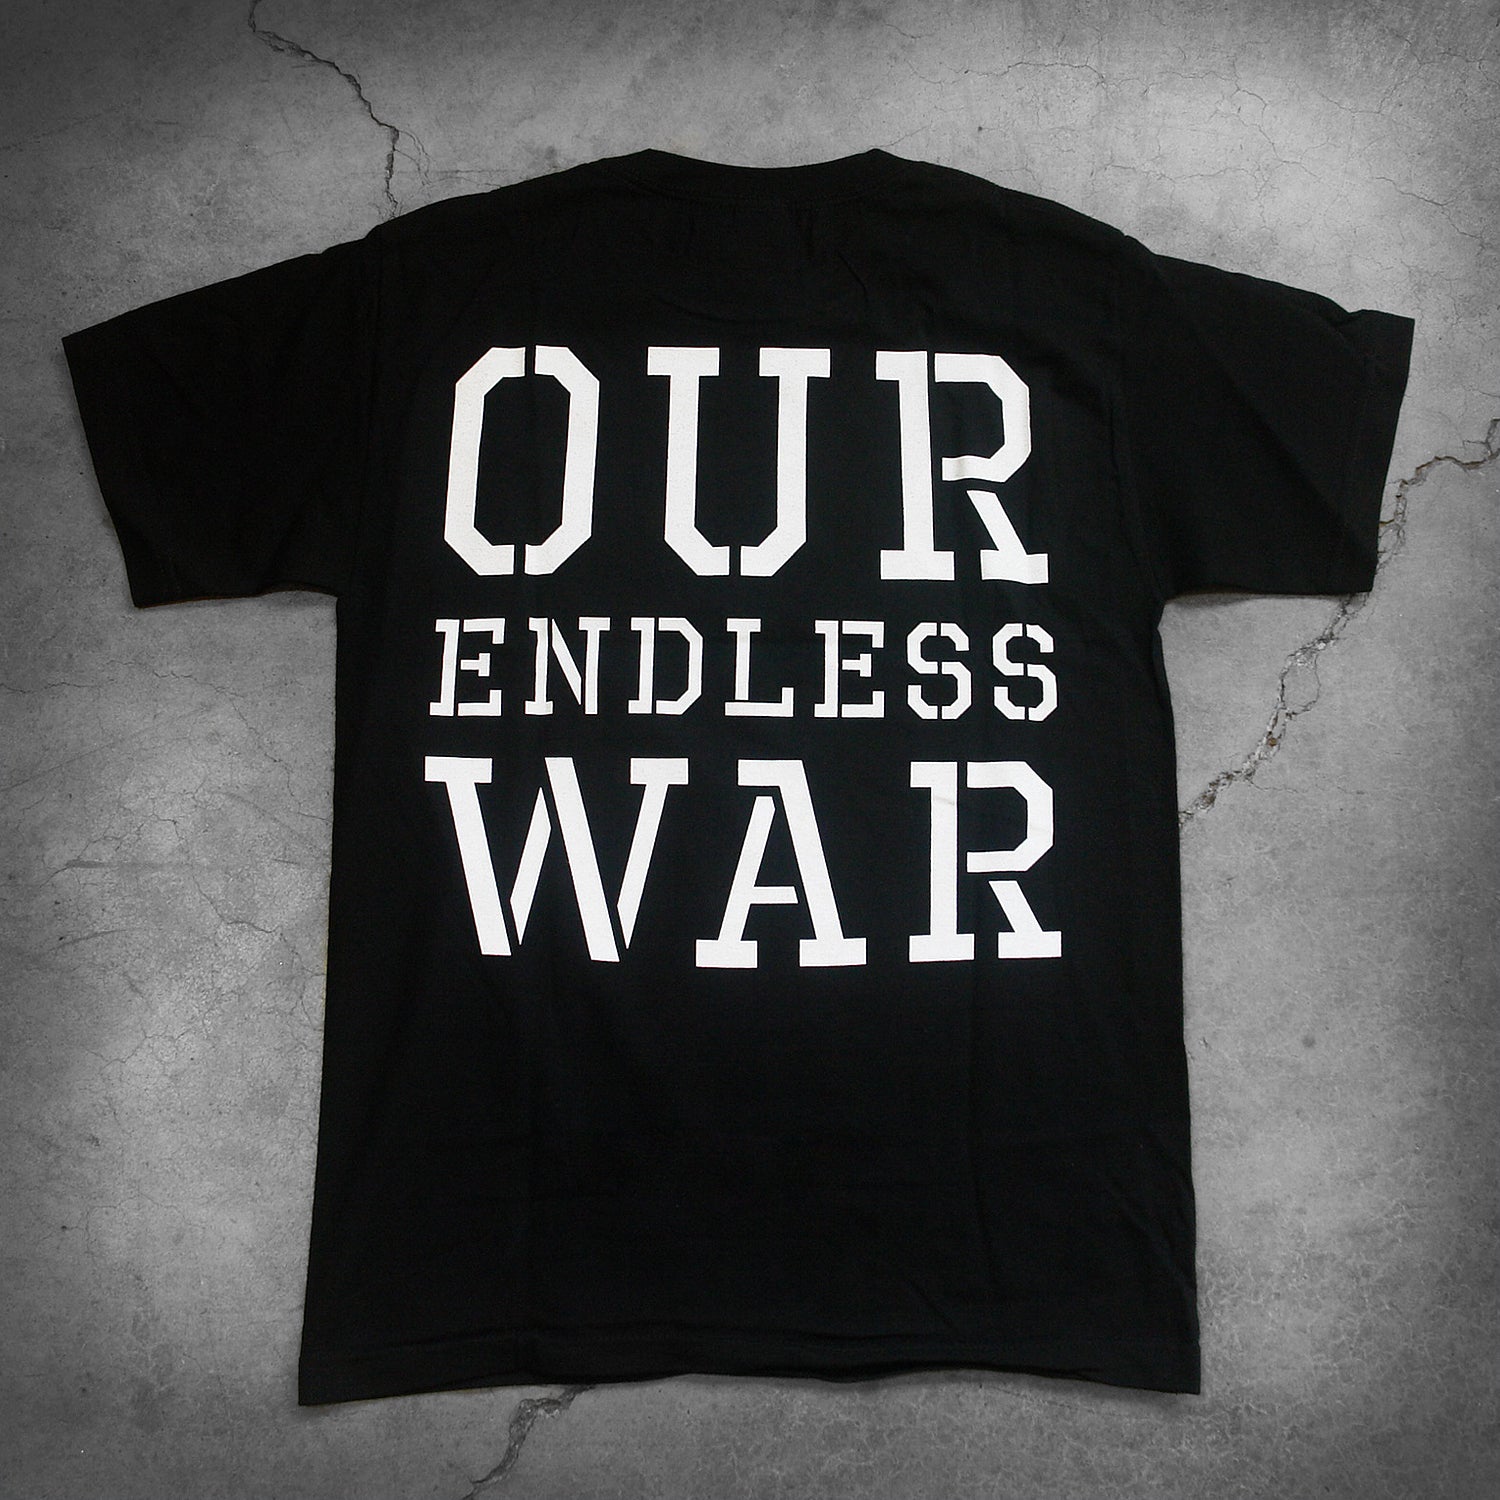 image of the back of a black tee shirt on a white background. the back of the shirt in large white text reads "our endless war".